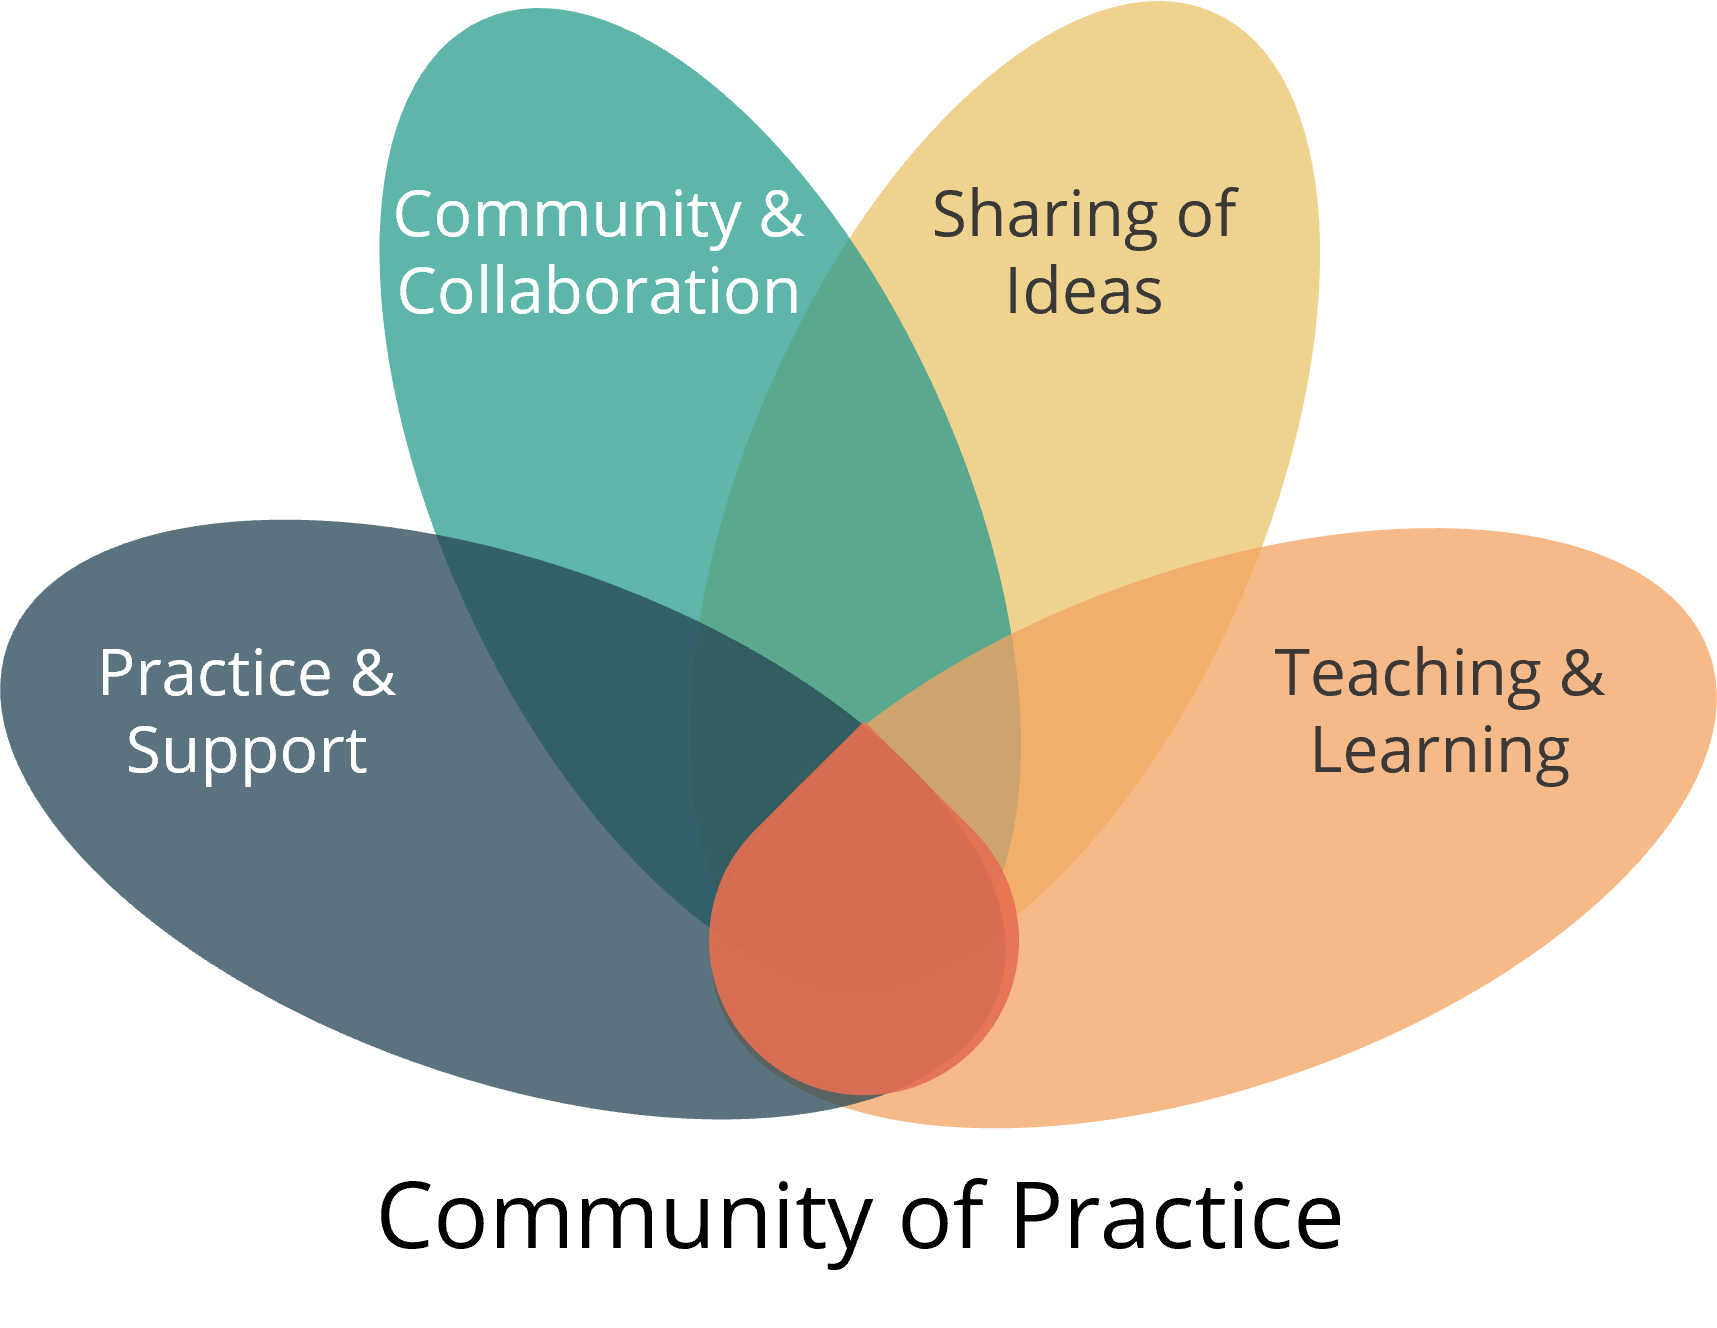 4 section venn diagram where the all intersect in at the bottom middle. the 4 sections are labelled: Teaching & Learning, Sharing of Ideas, Community & Collaboration, and Practice and Support